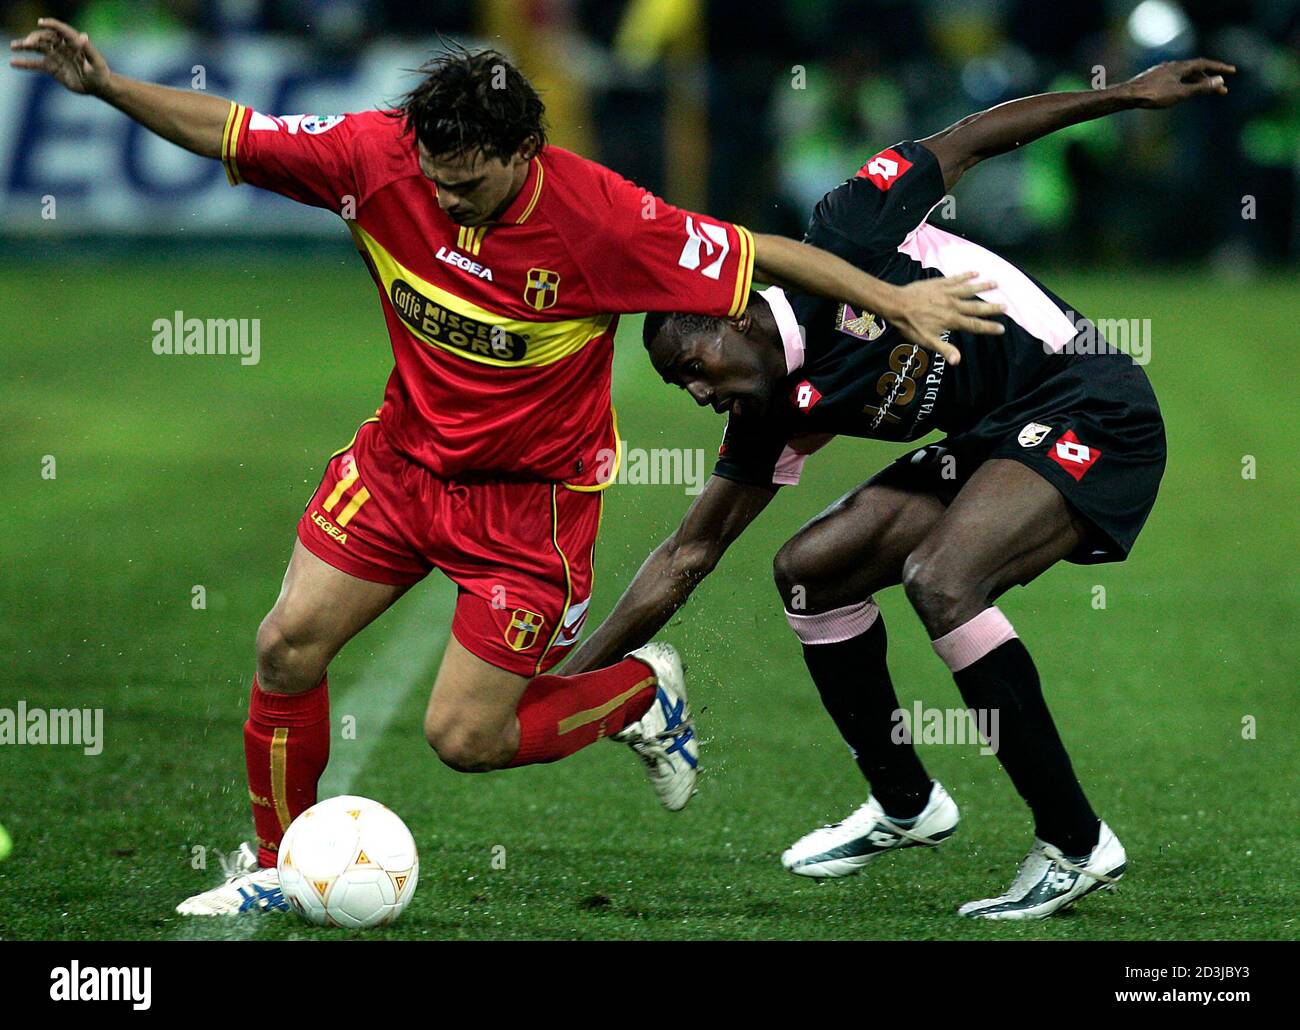 Messina's Arturo Di Napoli (L) challenges Kewullay Conteh of Palermo during their Serie A match at the San Filippo Stadium in Messina November 11, 2004. Sicily will be the centre of attention in Serie A on Thursday for the first time in nearly 40 years when Palermo and Messina, two of the three major cities on the island, meet in a local derby. Palermo, the Sicilian capital,is enjoying top flight football for the first time in 31 years while Messina's last campaign in Serie A was in 1965. REUTERS/Alessandro Bianchi  AB/ACM Stock Photo